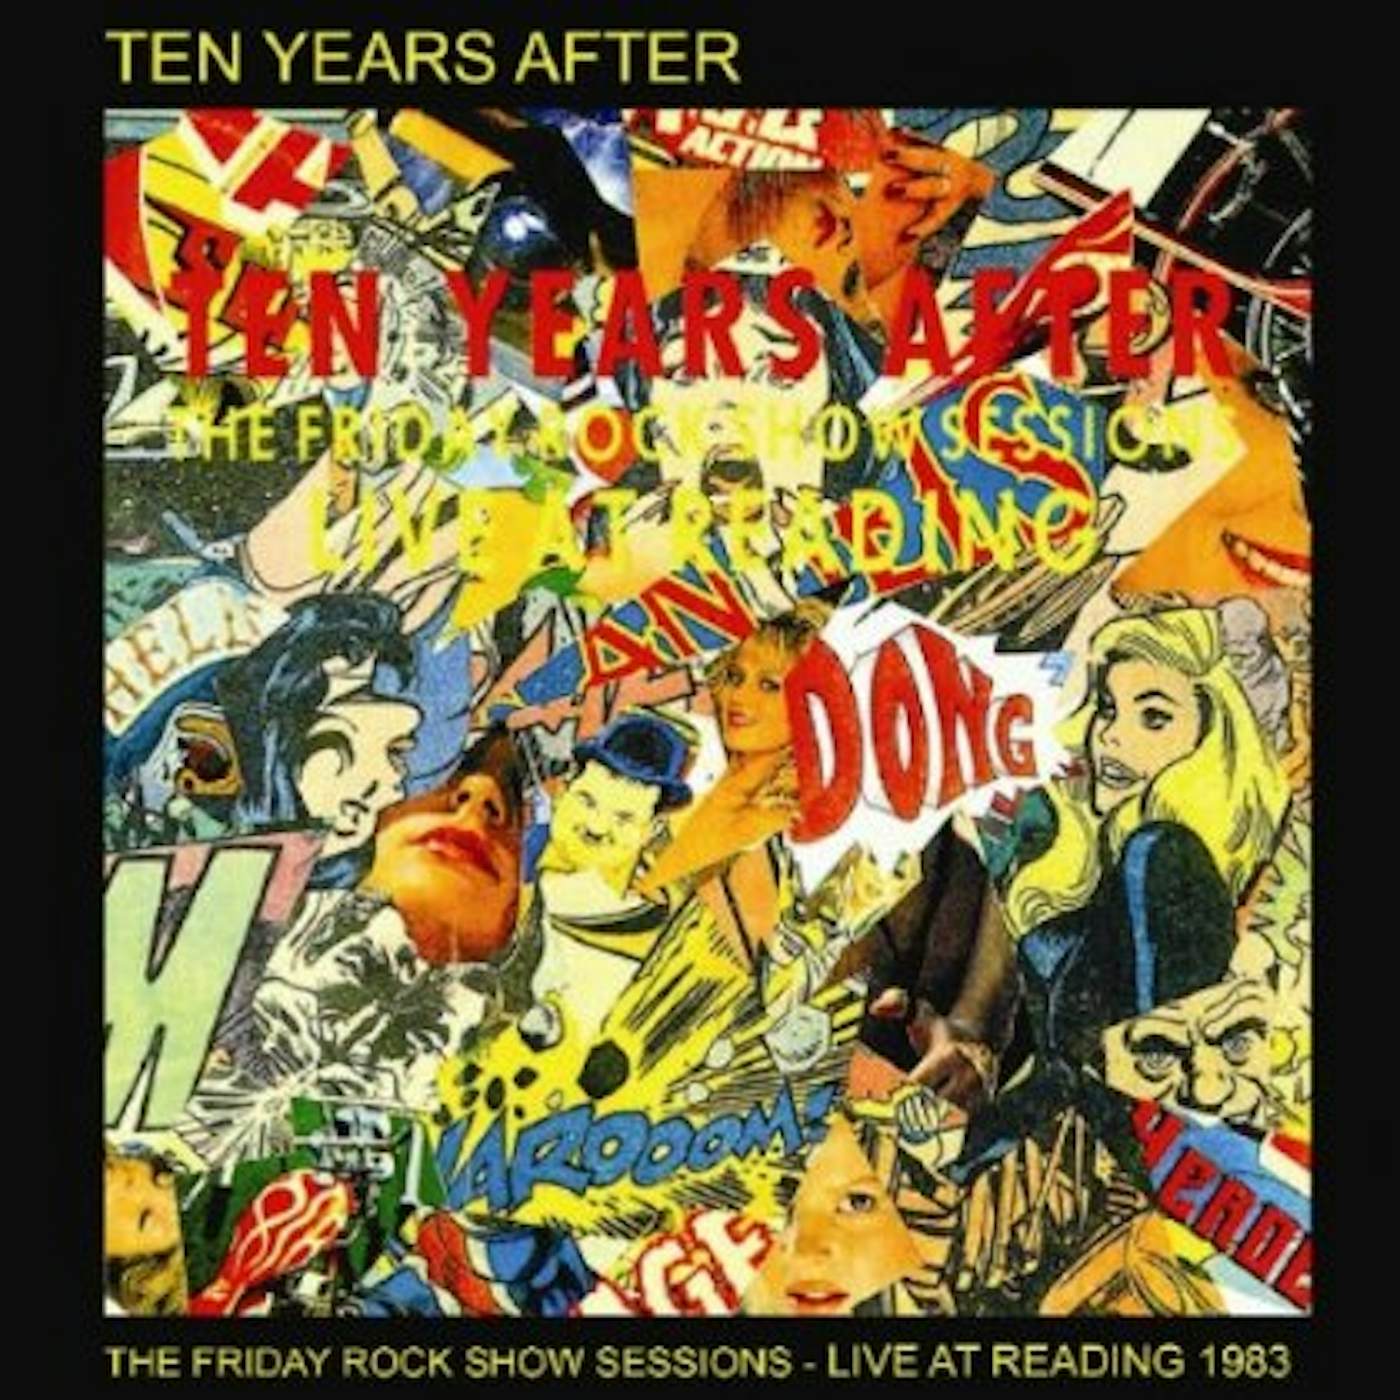 Ten Years After FRIDAY ROCK SHOW SESSIONS: LIVE AT READING '83 CD